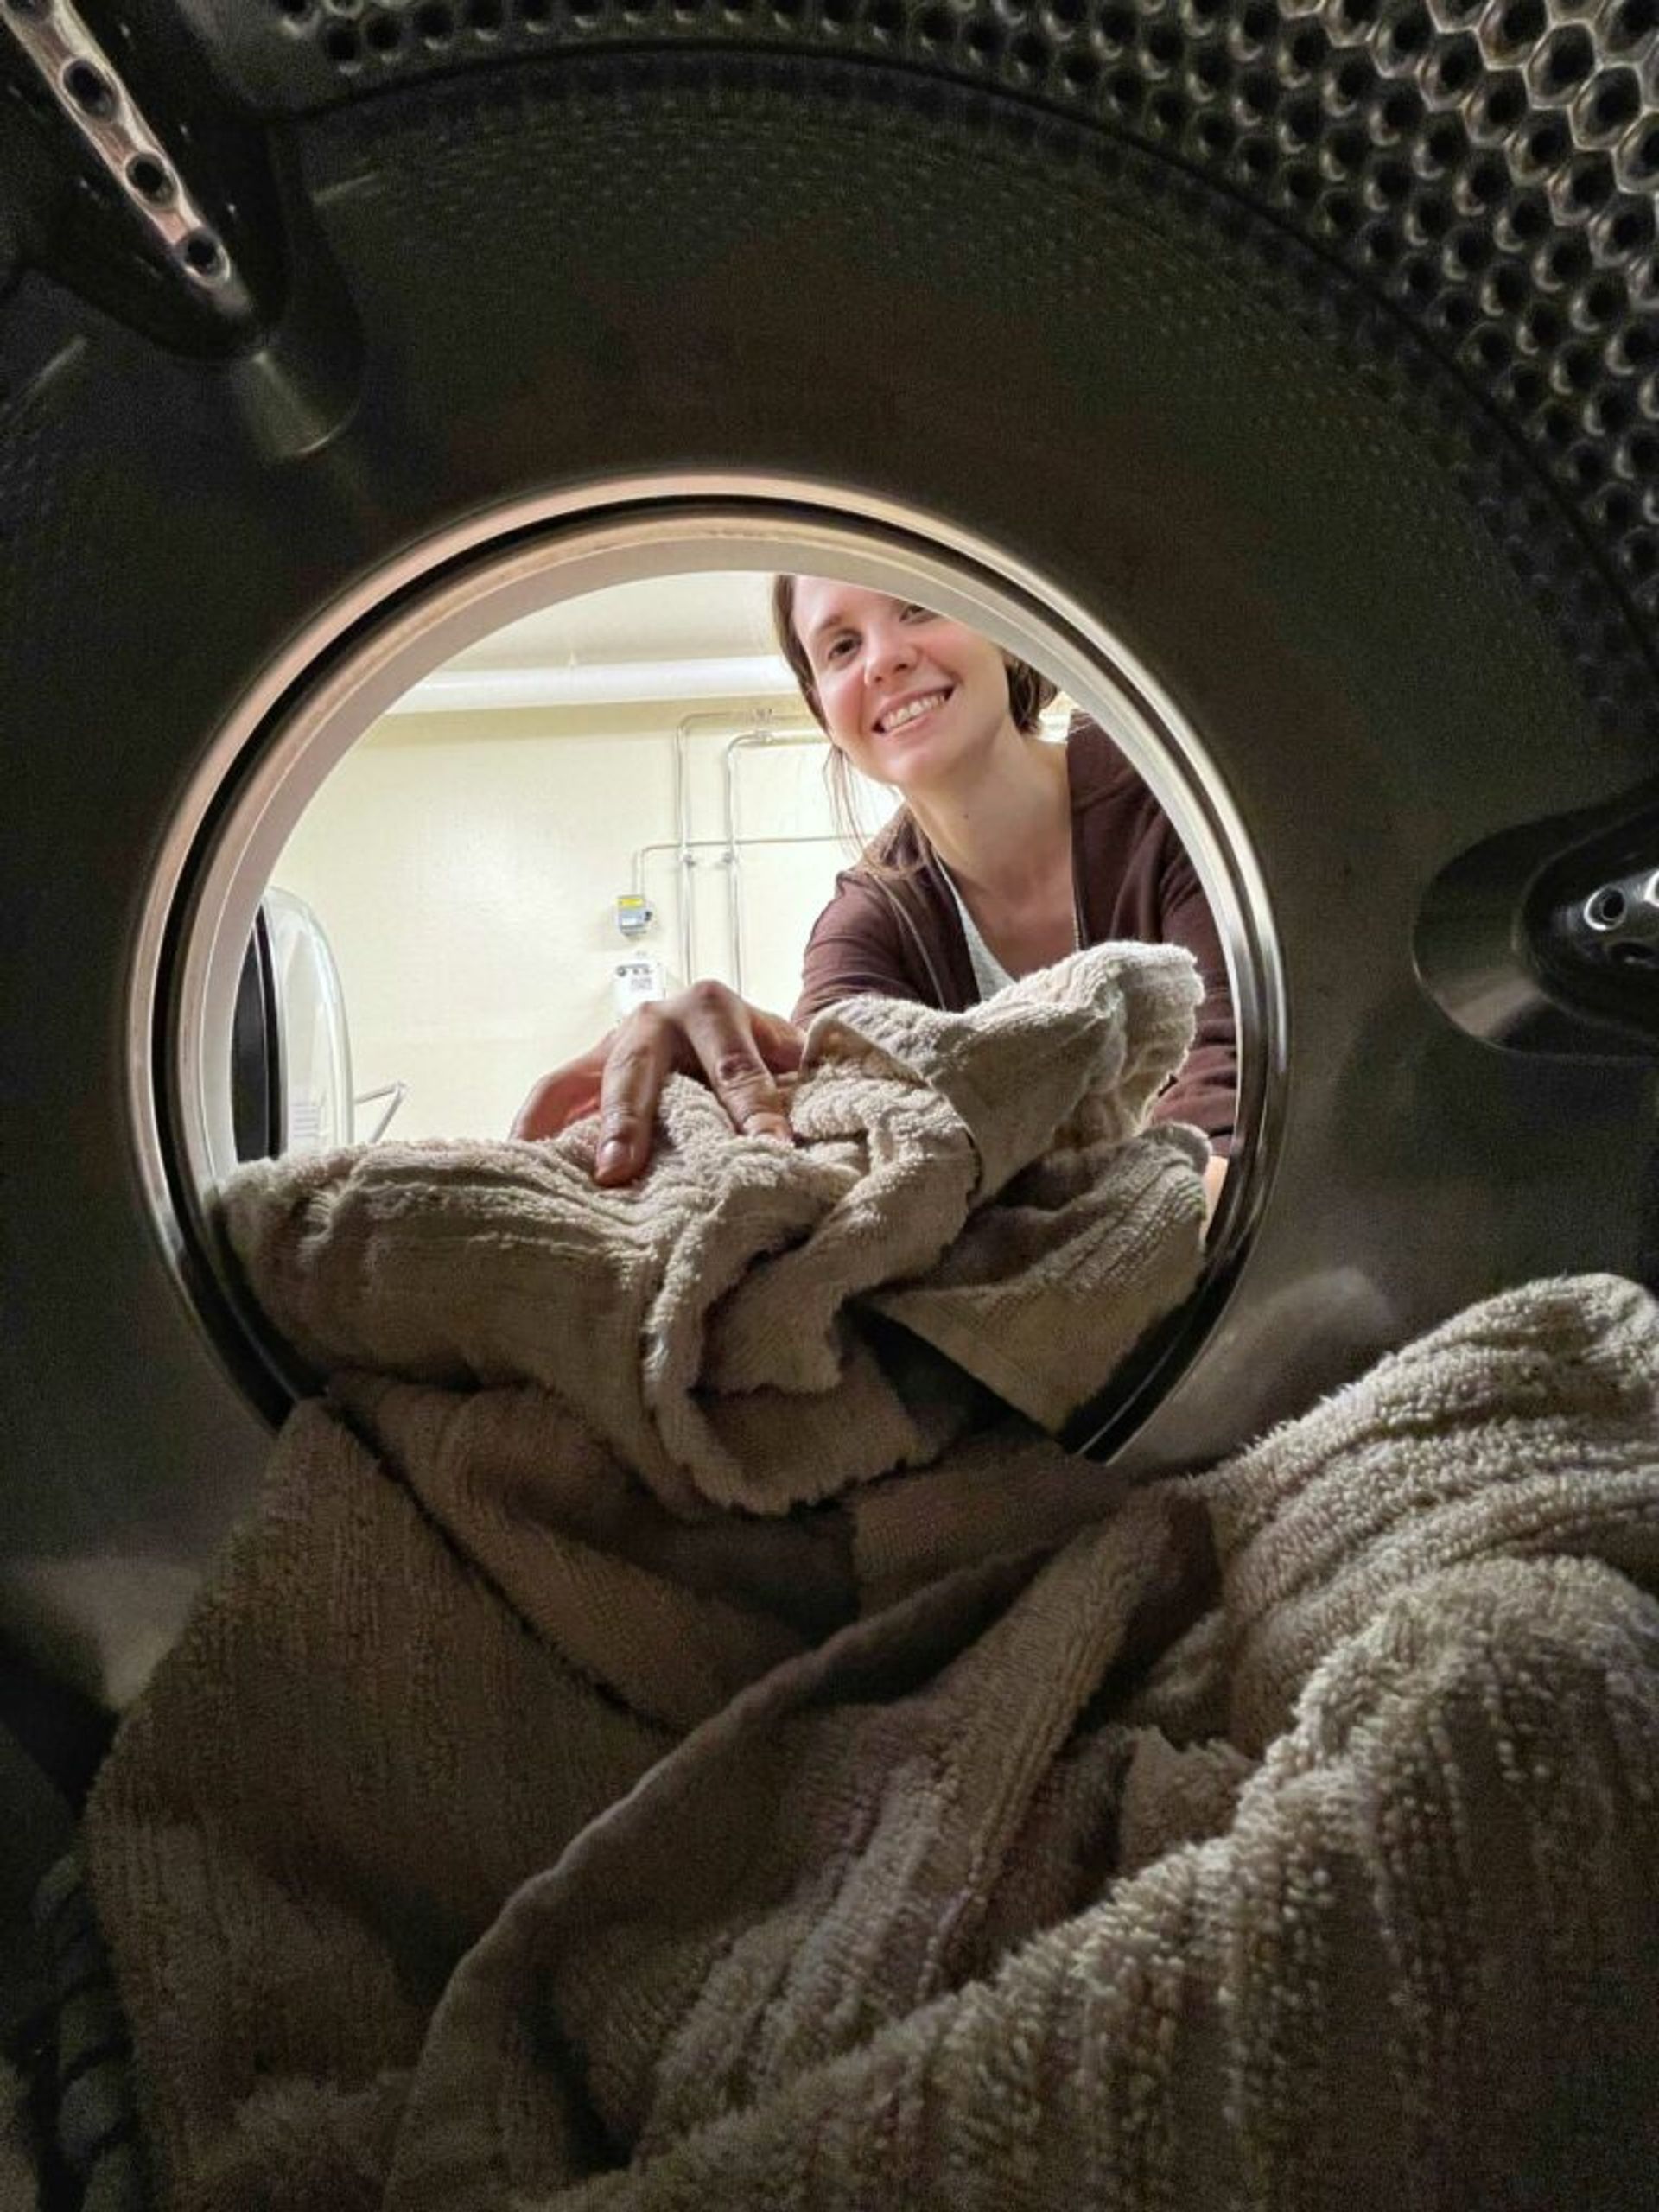 A photo taken from the inside of a washing machine when a girl is putting a towel into the washing machine.  